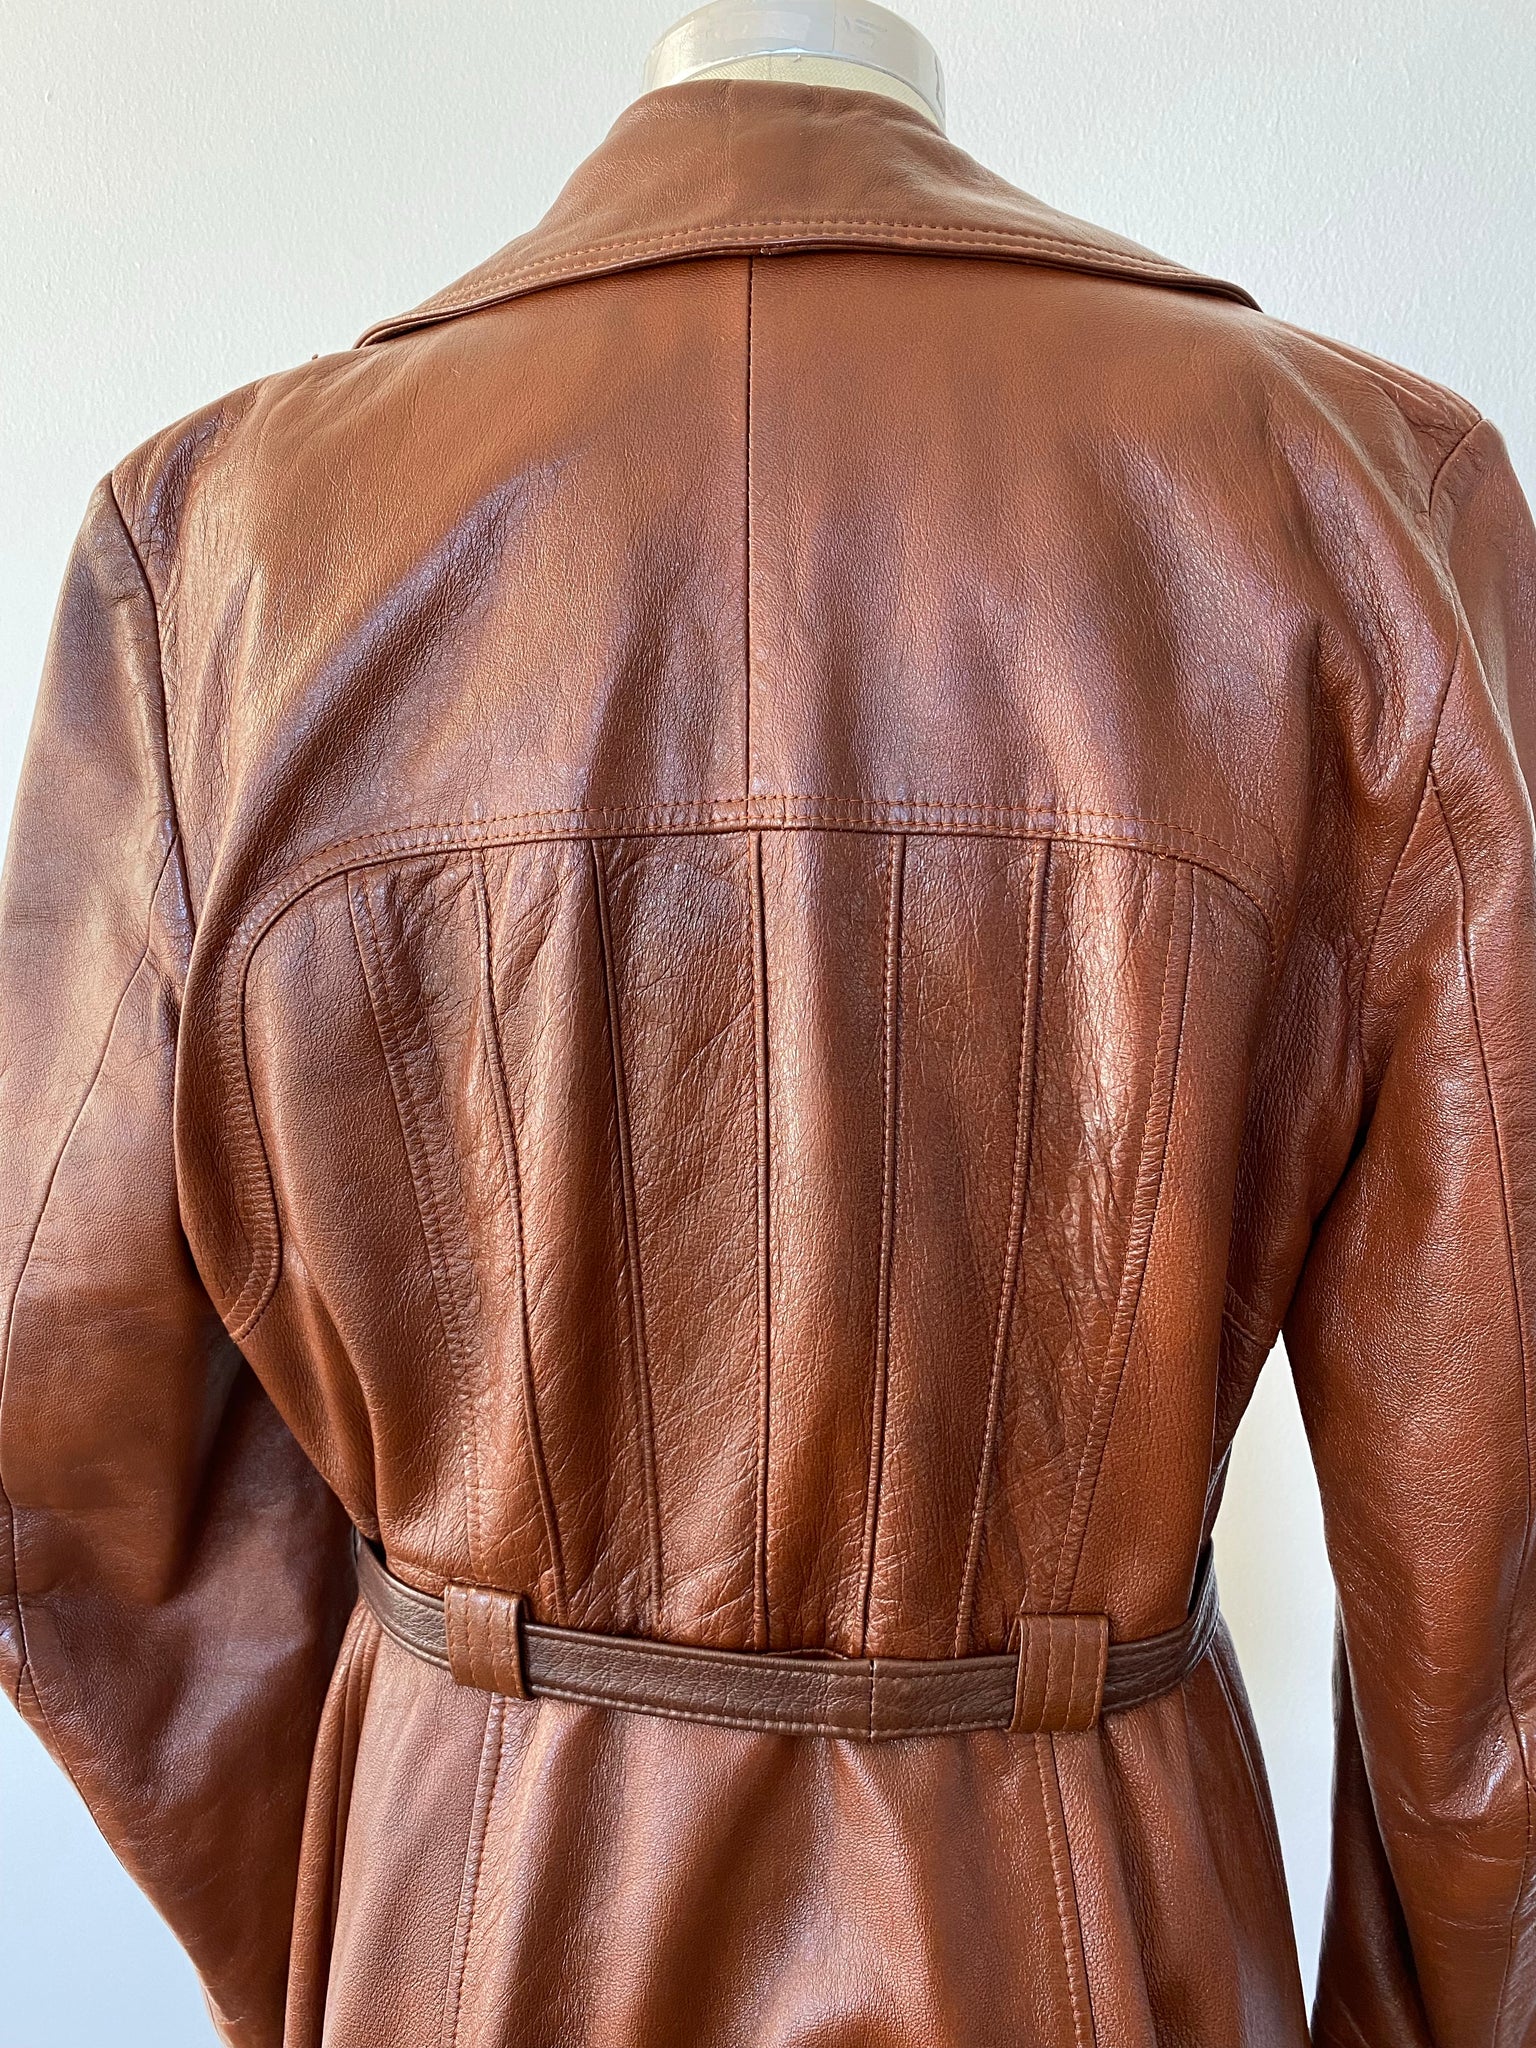 Two Tone Chocolate Leather Trench